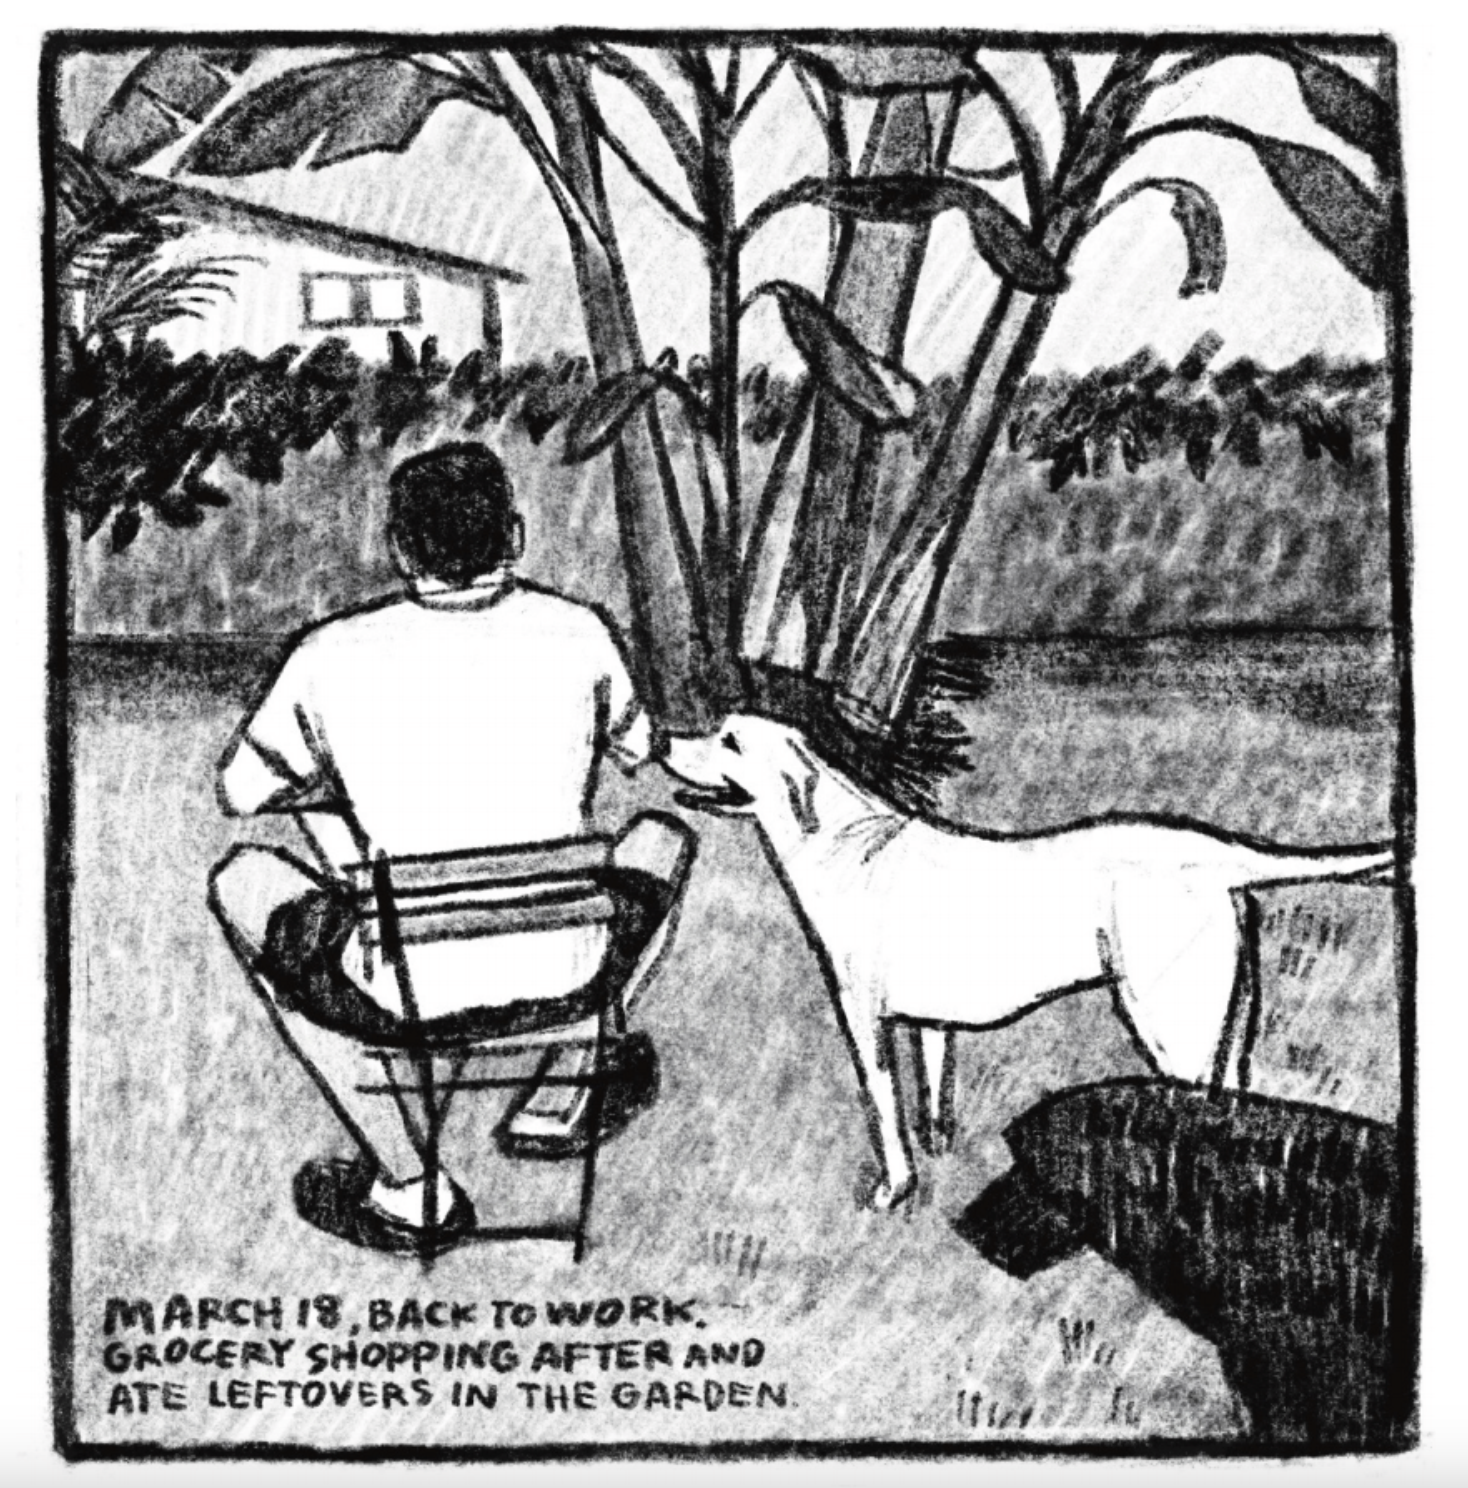 Tony sits, back turned to the viewer, looking at trees in a backyard, with a view of a house beyond the fence. A white dog stands happily and expectantly next to him. A shadowed dog is visible in the lower right corner.
Description grounds: "March 18. Back to work. Grocery shopping after and ate leftovers in the garden."